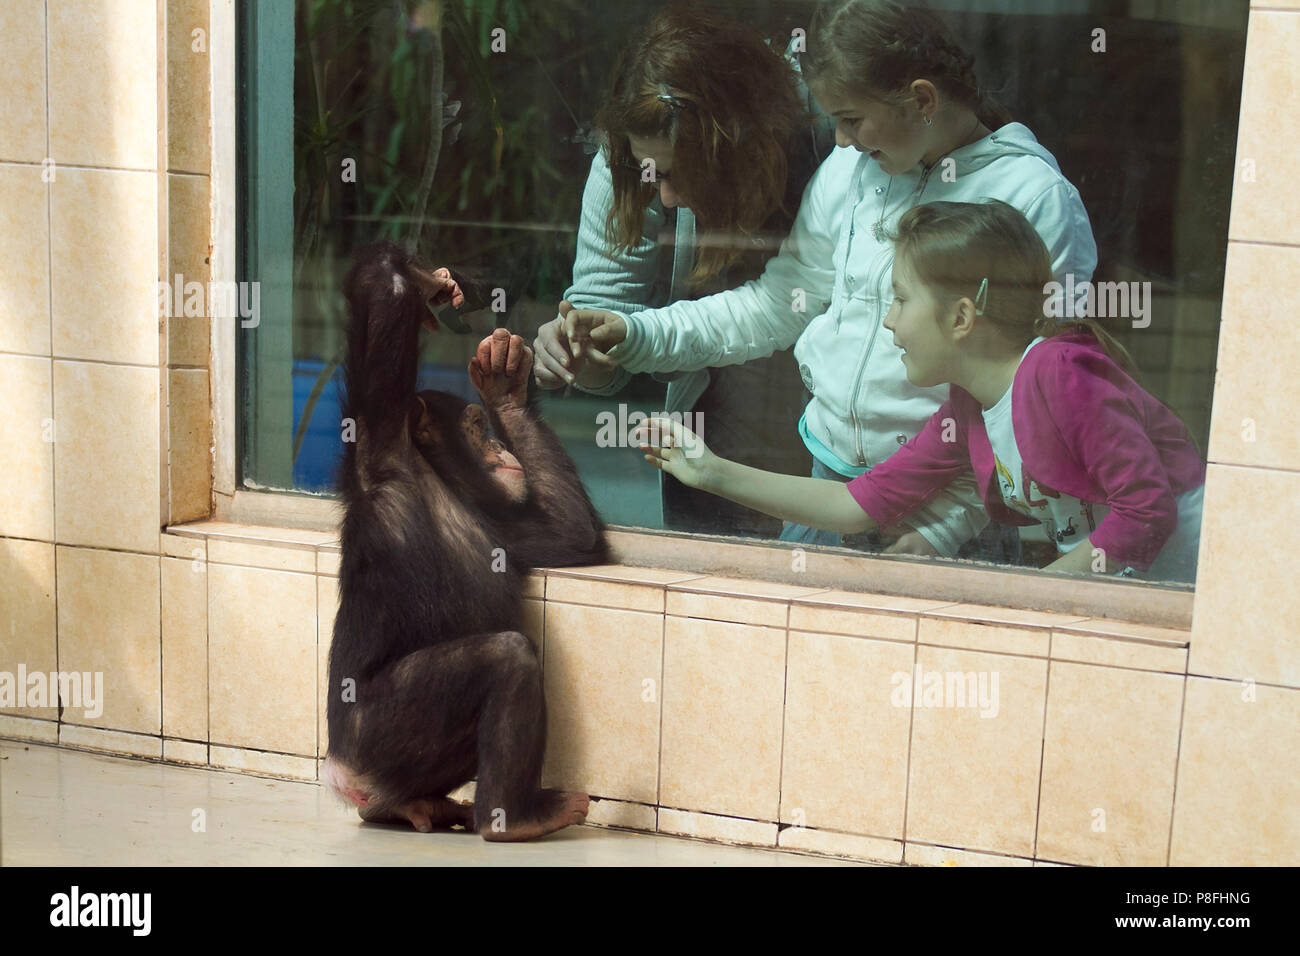 Chimp interacting with people chimpanzee interacting with people in the zoo Stock Photo